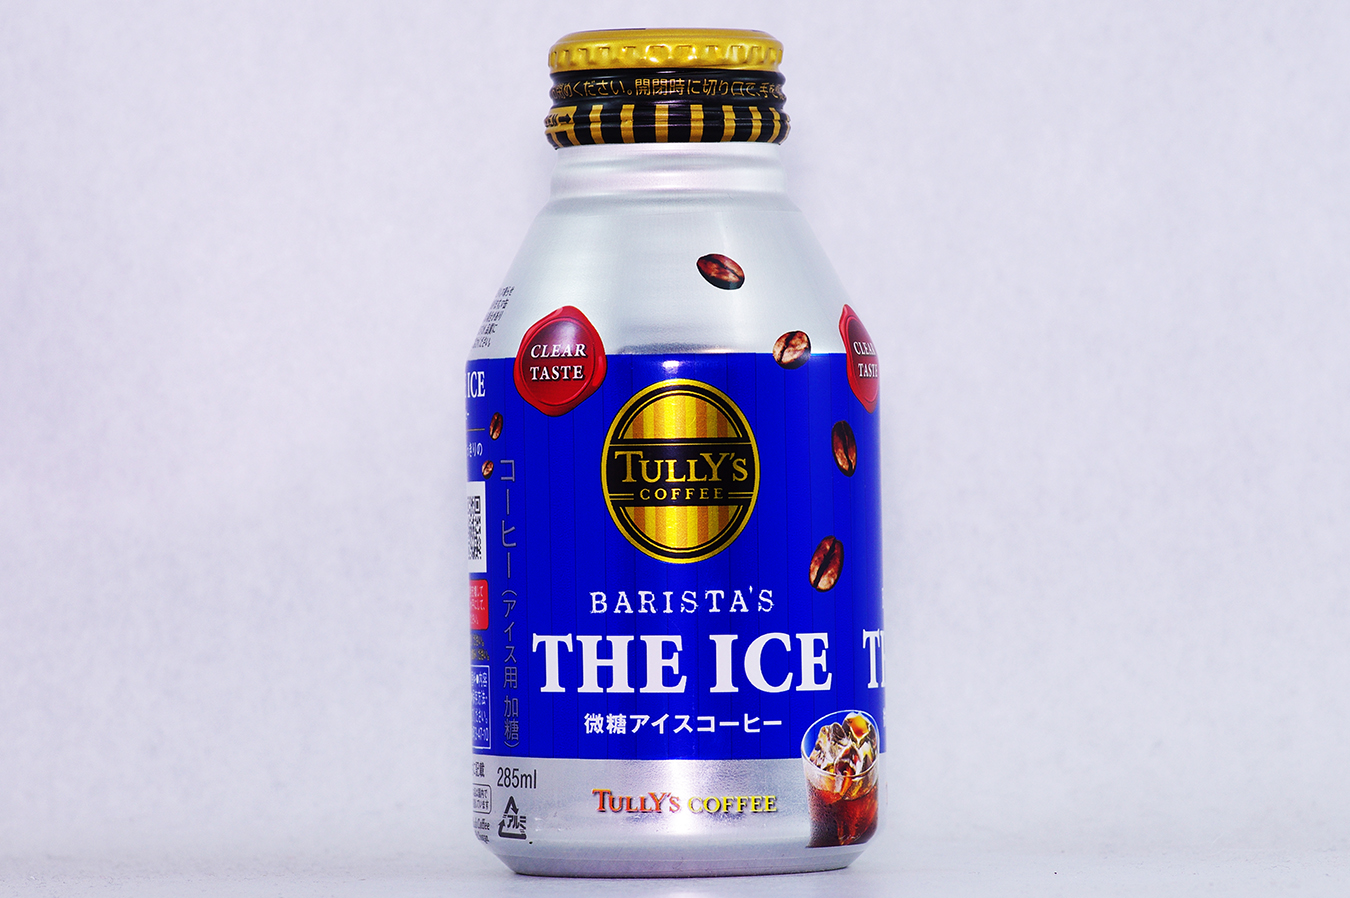 TULLY'S COFFEE BARISTA'S THE ICE 2017年3月